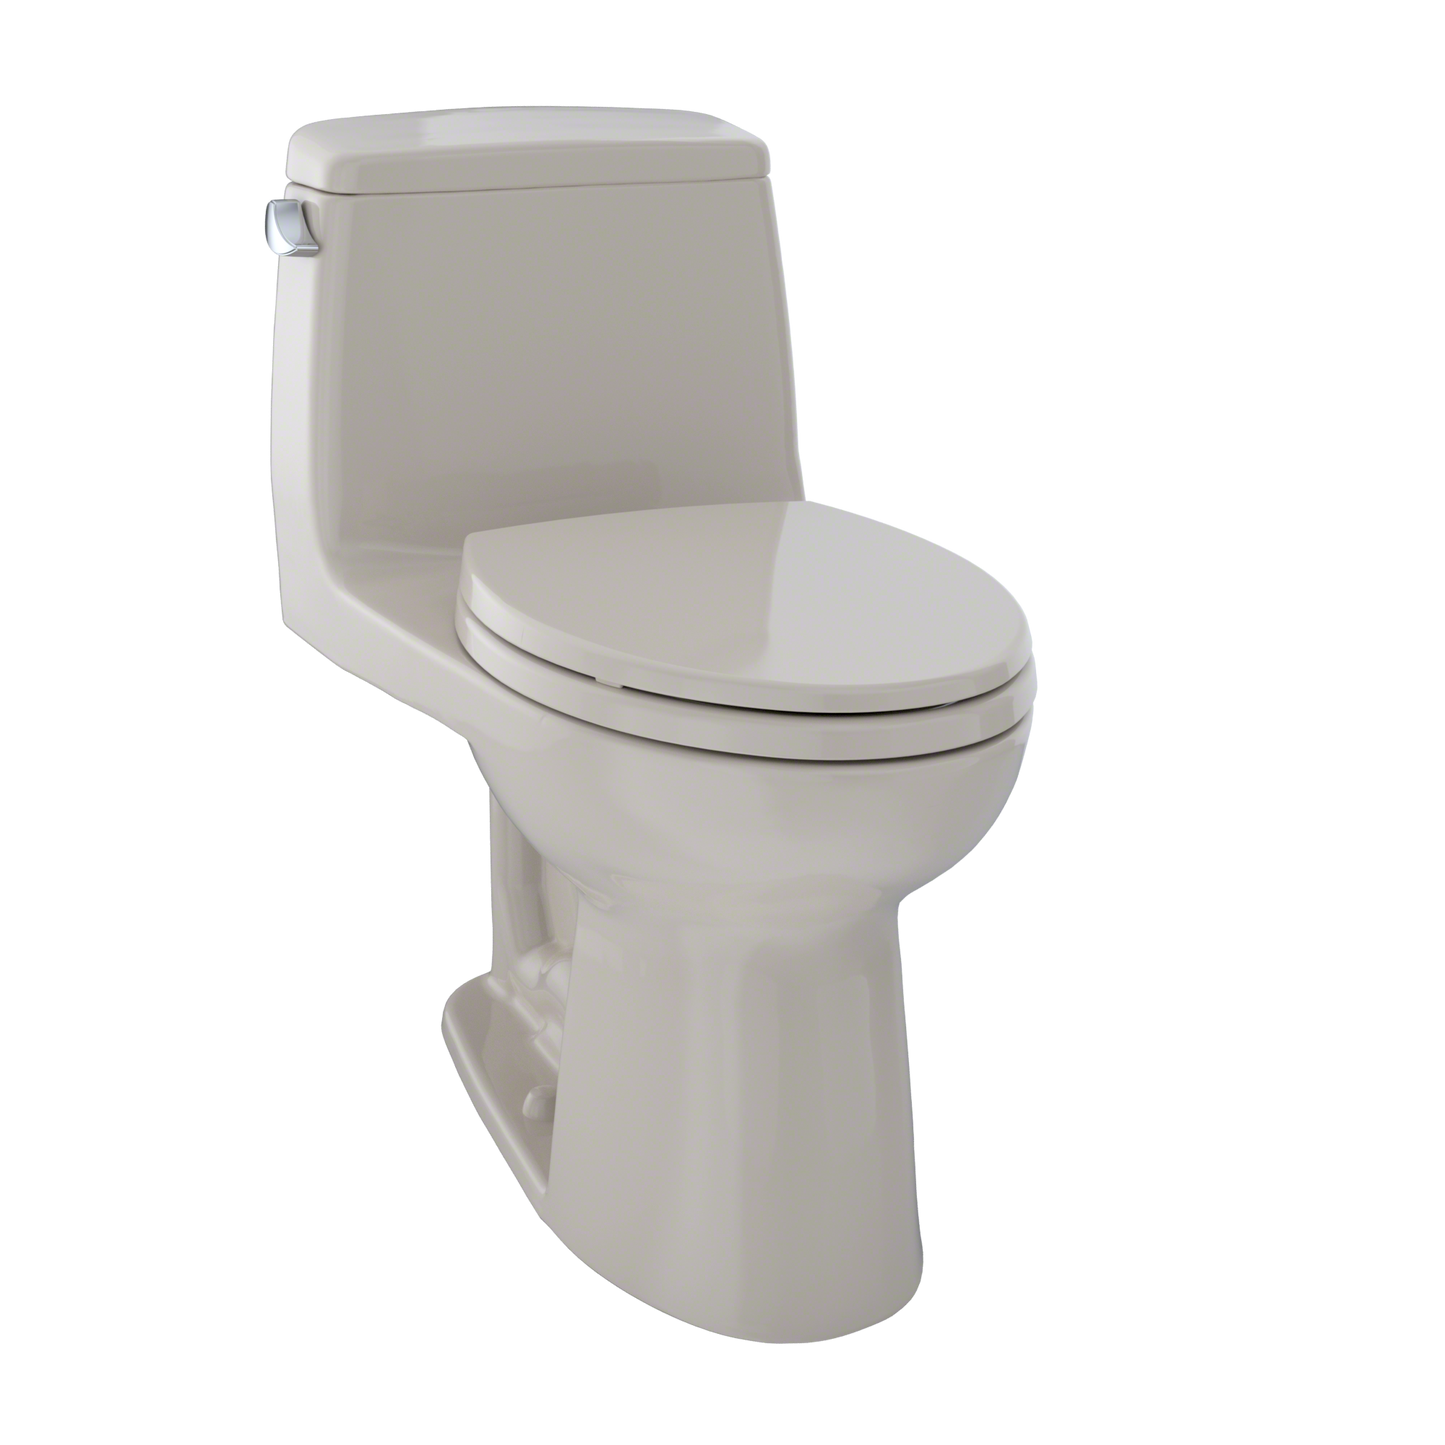 Toto MS854114SL#03 - ltraMax One Piece Elongated 1.6 GPF Toilet with G-Max Flush System - Bone